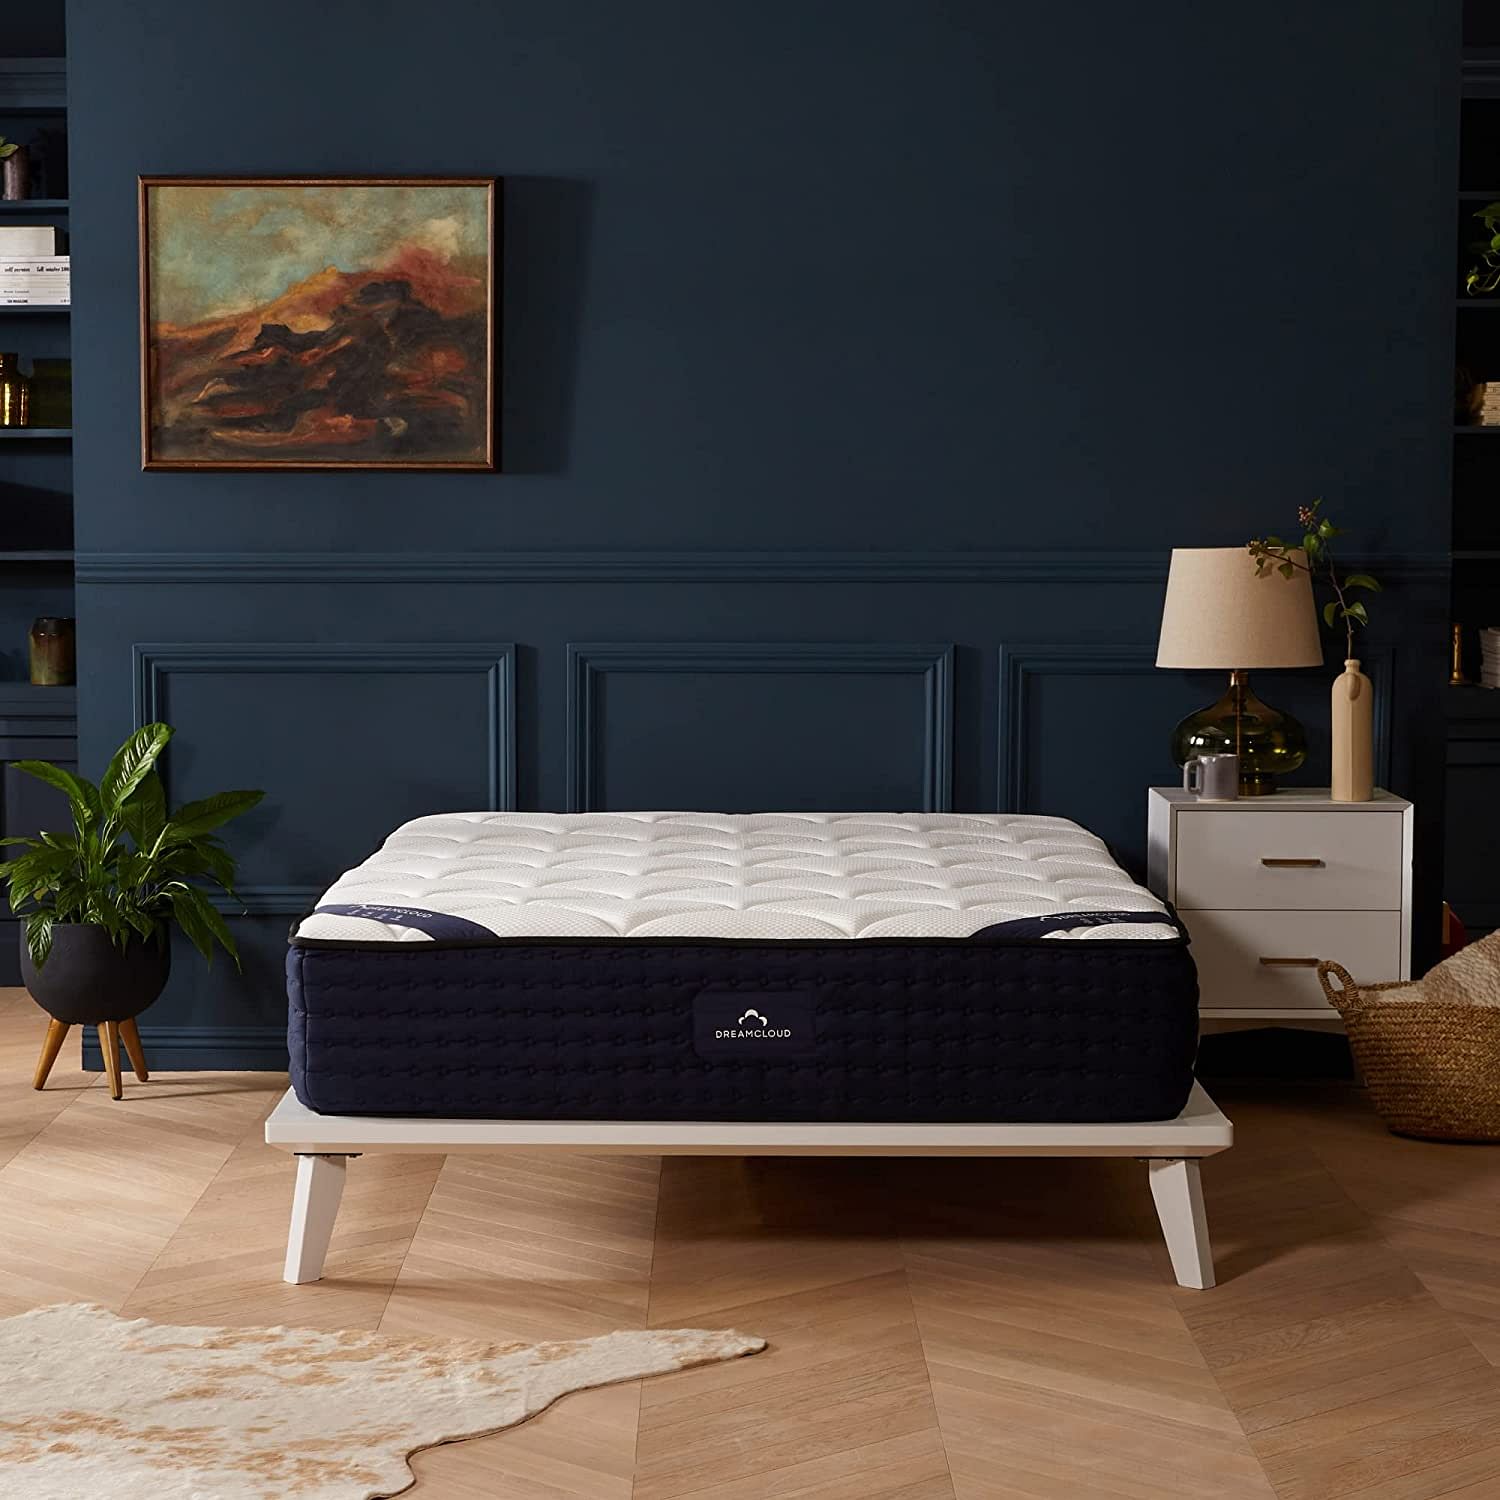 Where To Buy Dreamcloud Mattresses